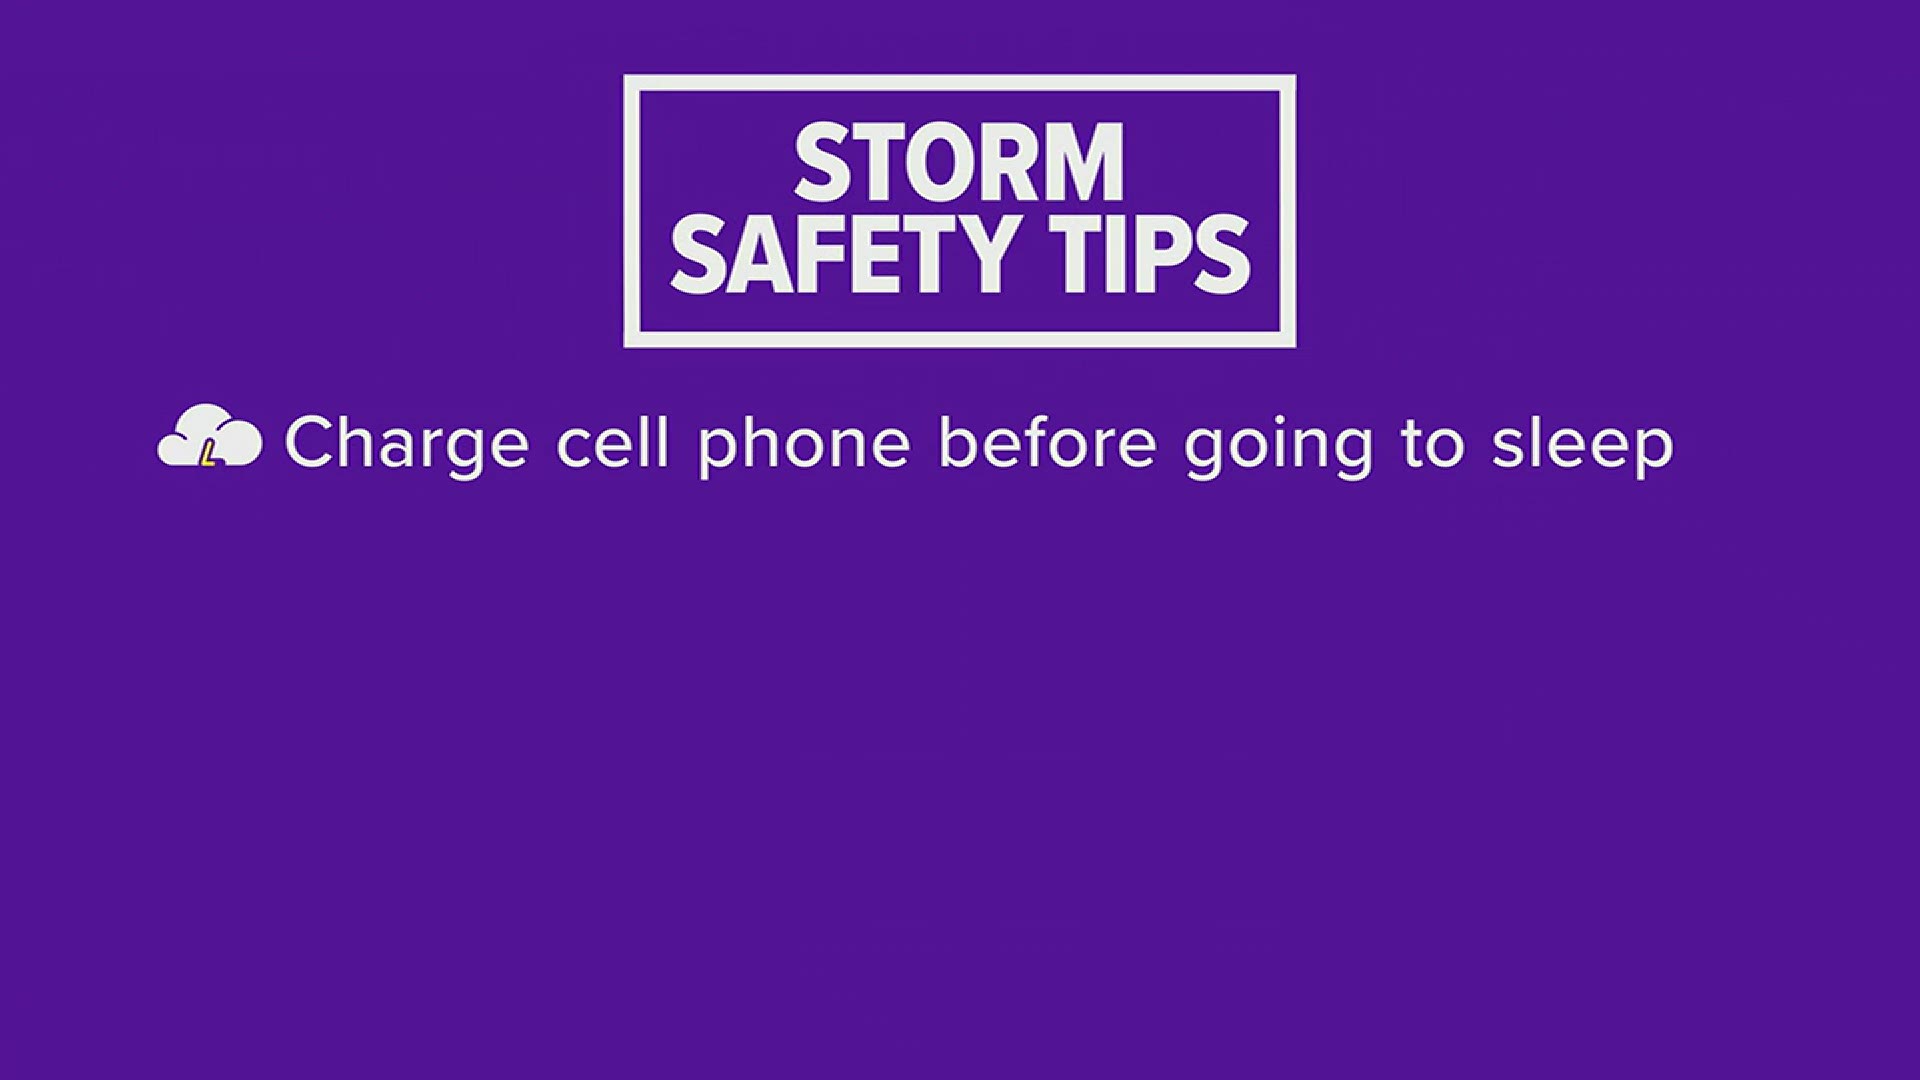 Make sure you have a safety plan in place before severe weather hits. Also, make sure to charge up your cell phones.